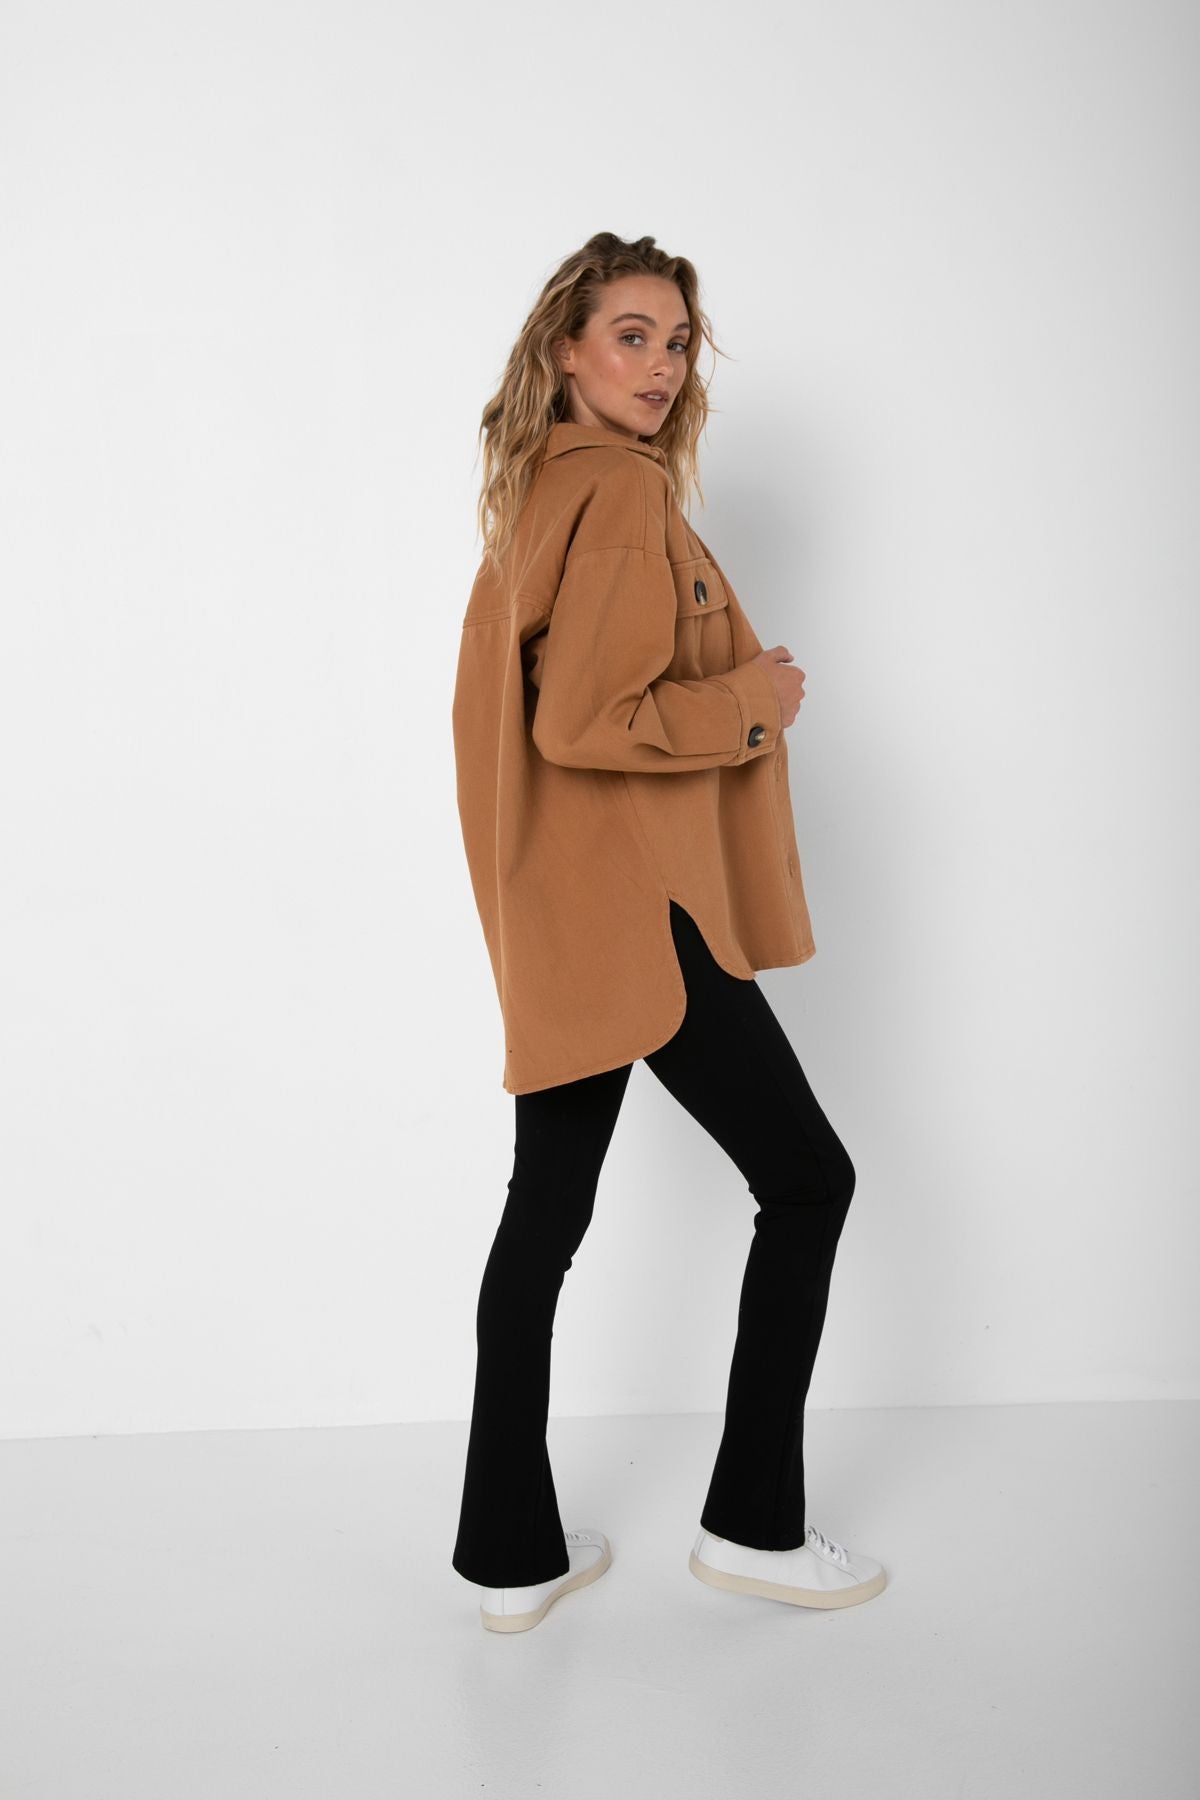 Curled Bailage Hair Caucasian Female wearing Long Sleeve Buttoned Down Top Lightweight Boyfriend Relaxed Fit Jacket Blouse Stylish Shacket Timeless Autumn and Winter Accessory Two Front Buttoned Pockets Side Slits in Tan paired with scoop neck black tee and Black high waisted stretchy long front slit pants and white sneakers